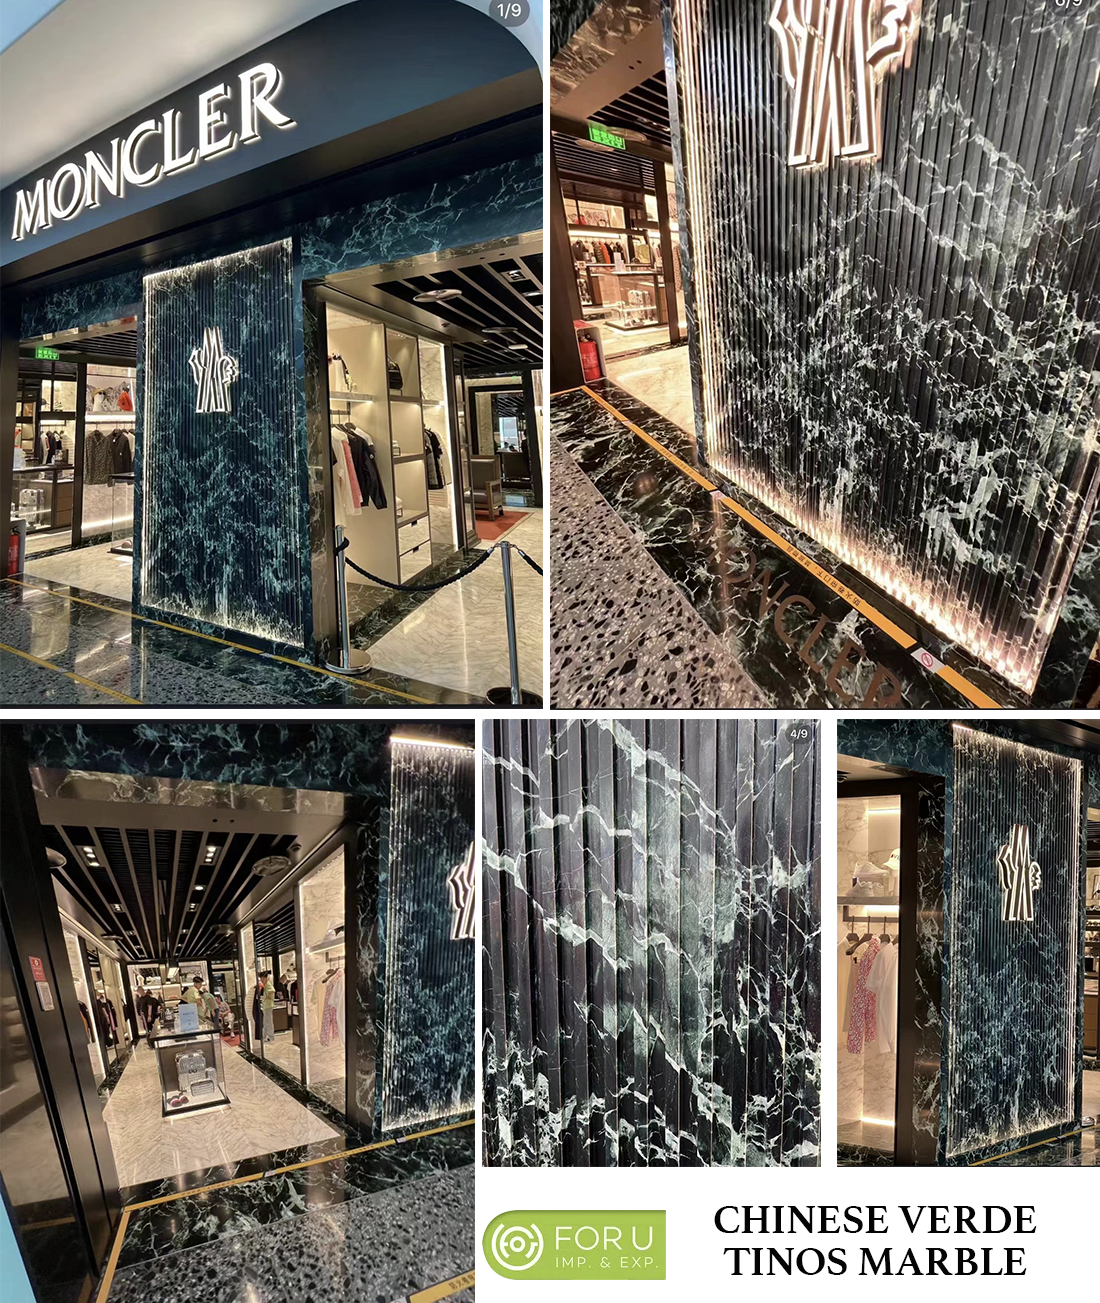 Verde Tinos Marble Wall and Floor Projects for Boutique Stores Projects | FOR U STONE